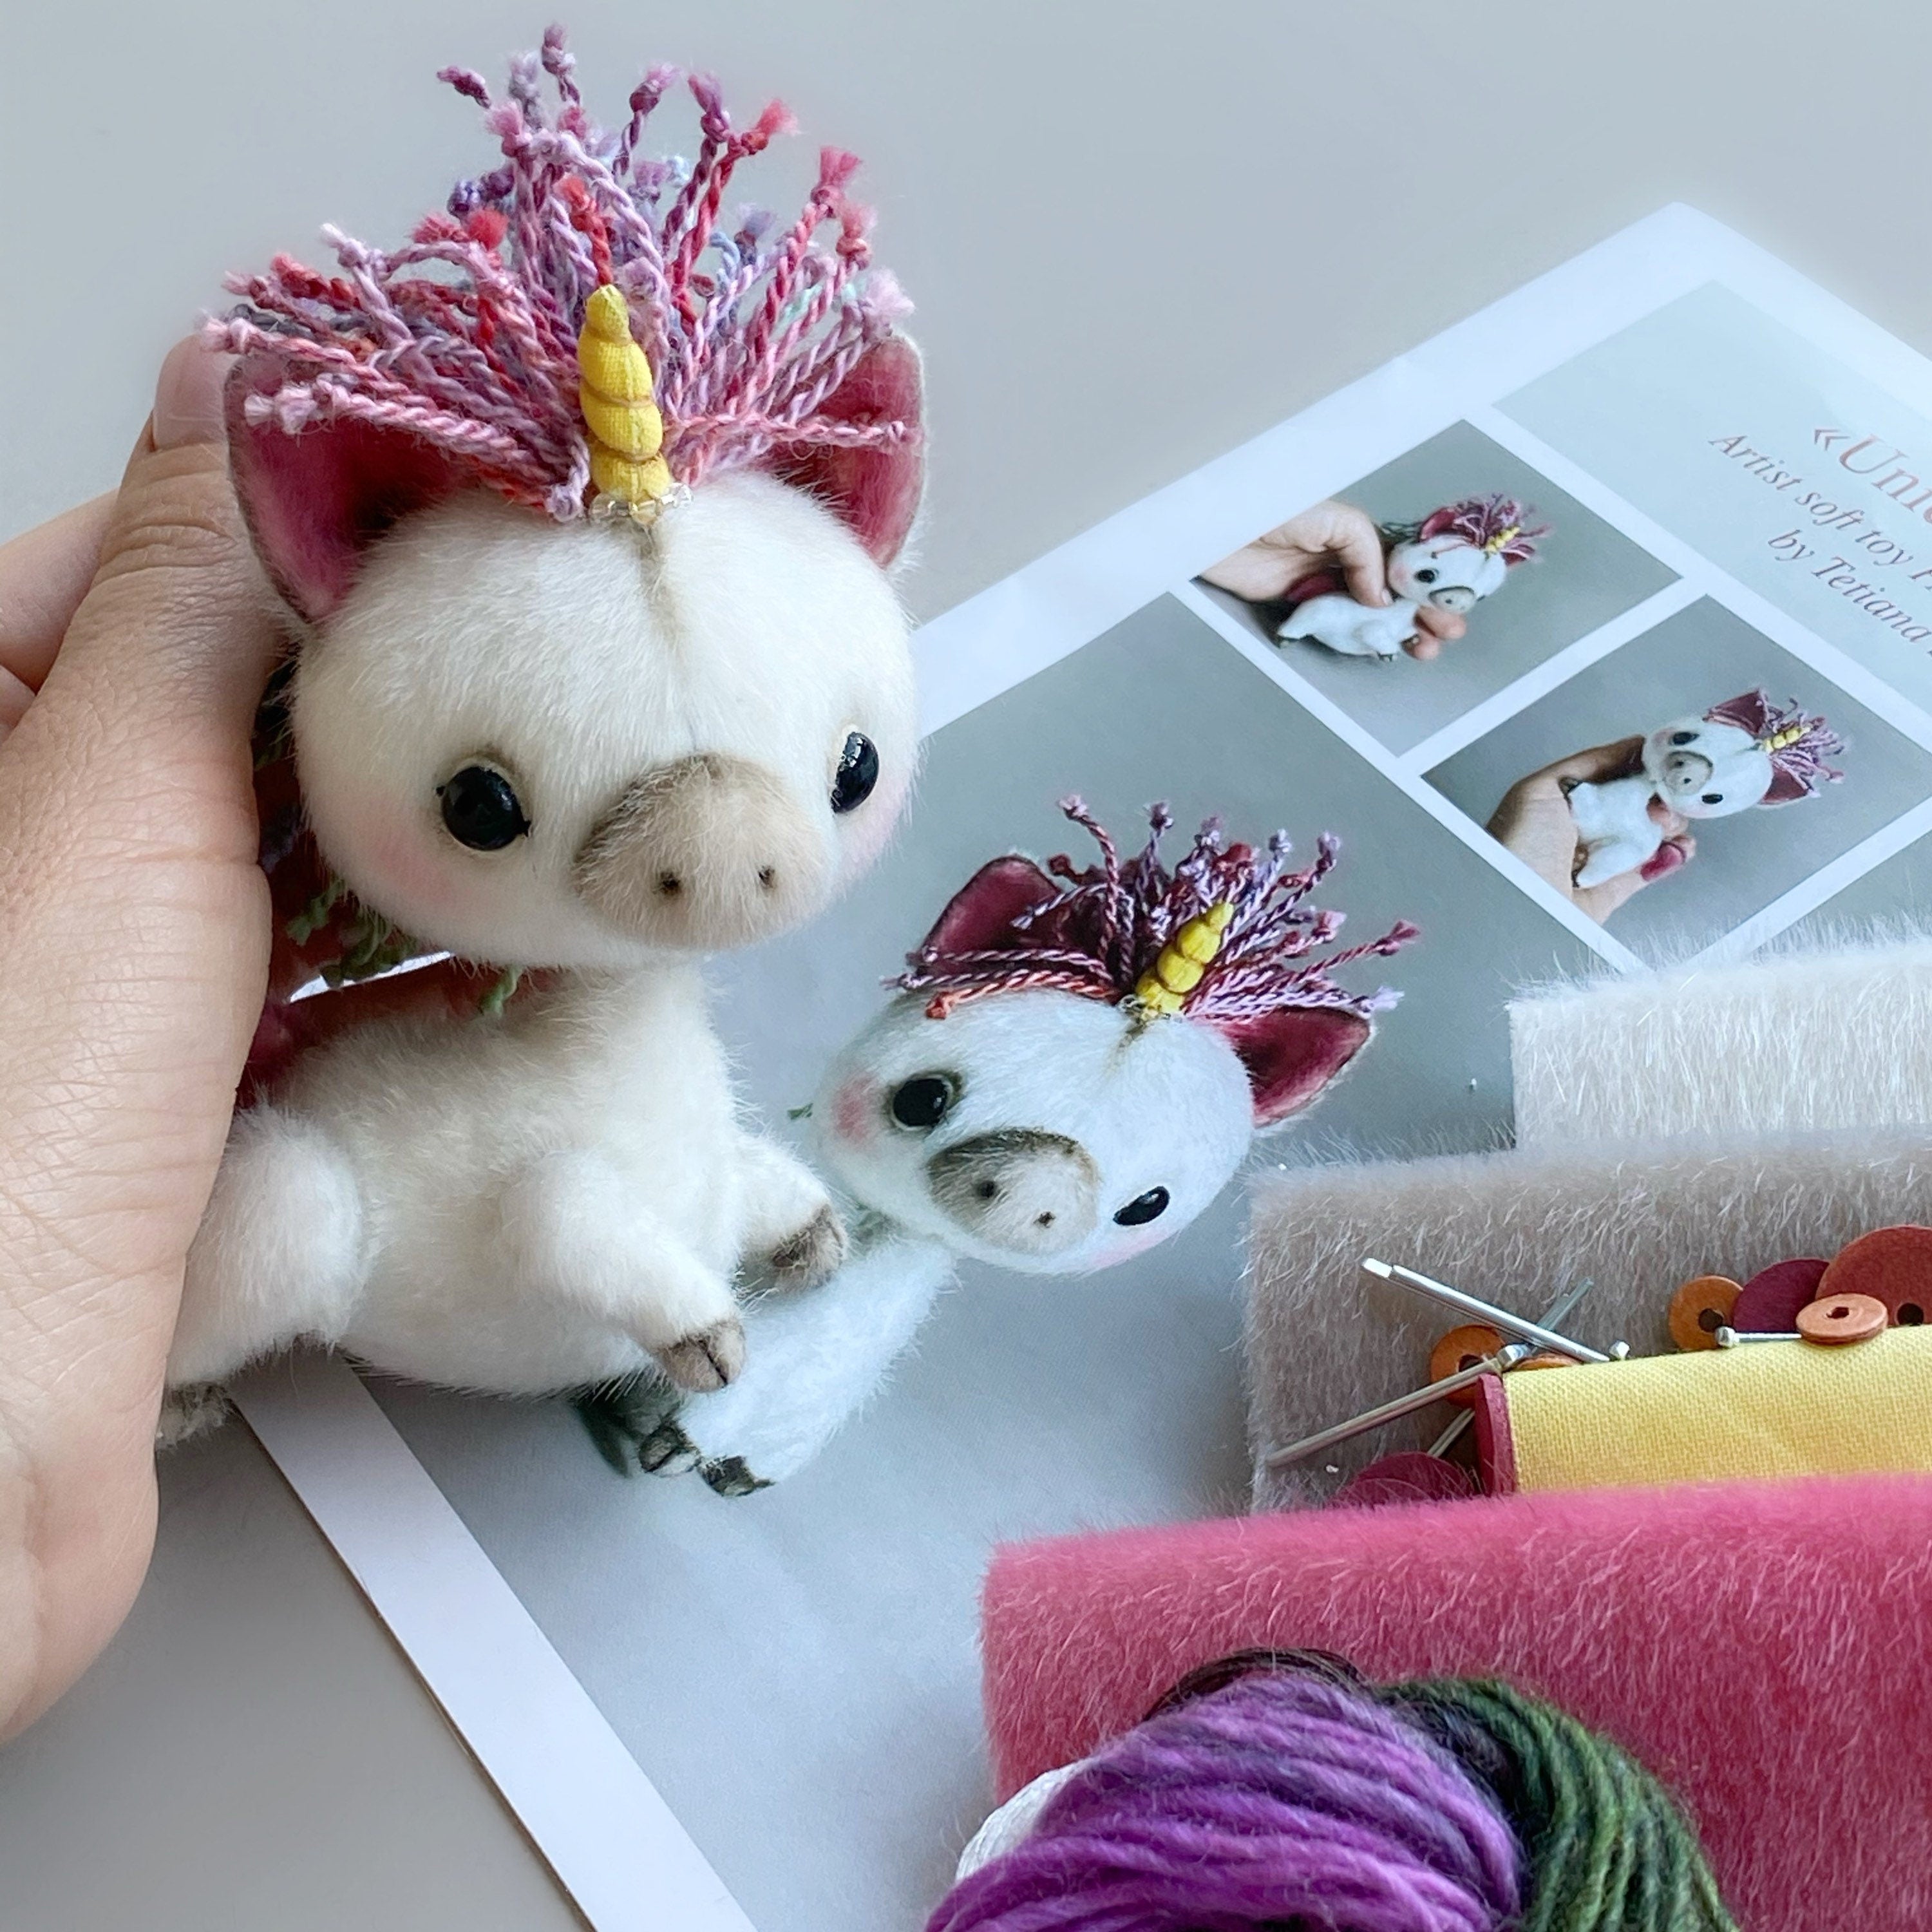 Unicorn - Sewing KIT, stuffed toy unicorn diy, gift for creative person, sewing pattern and materials, how to make a toy video tutorials